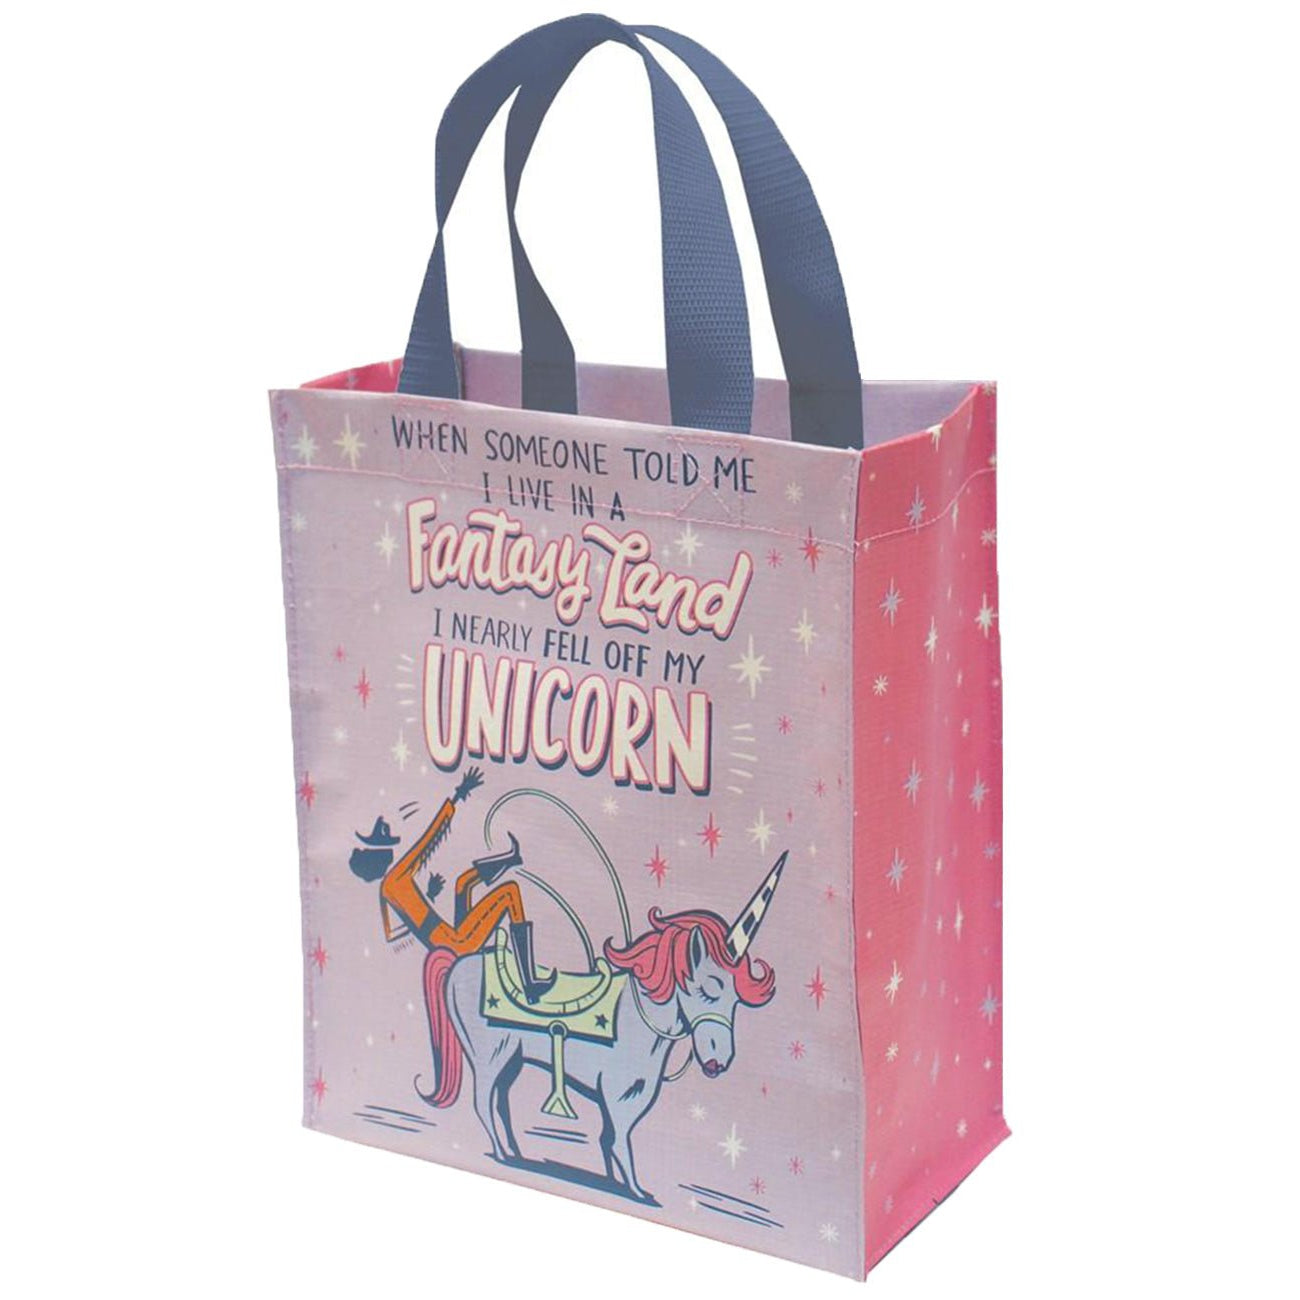 When Someone Told Me I Live In A Fantasy Land, I Nearly Fell Off My Unicorn Tote Bag